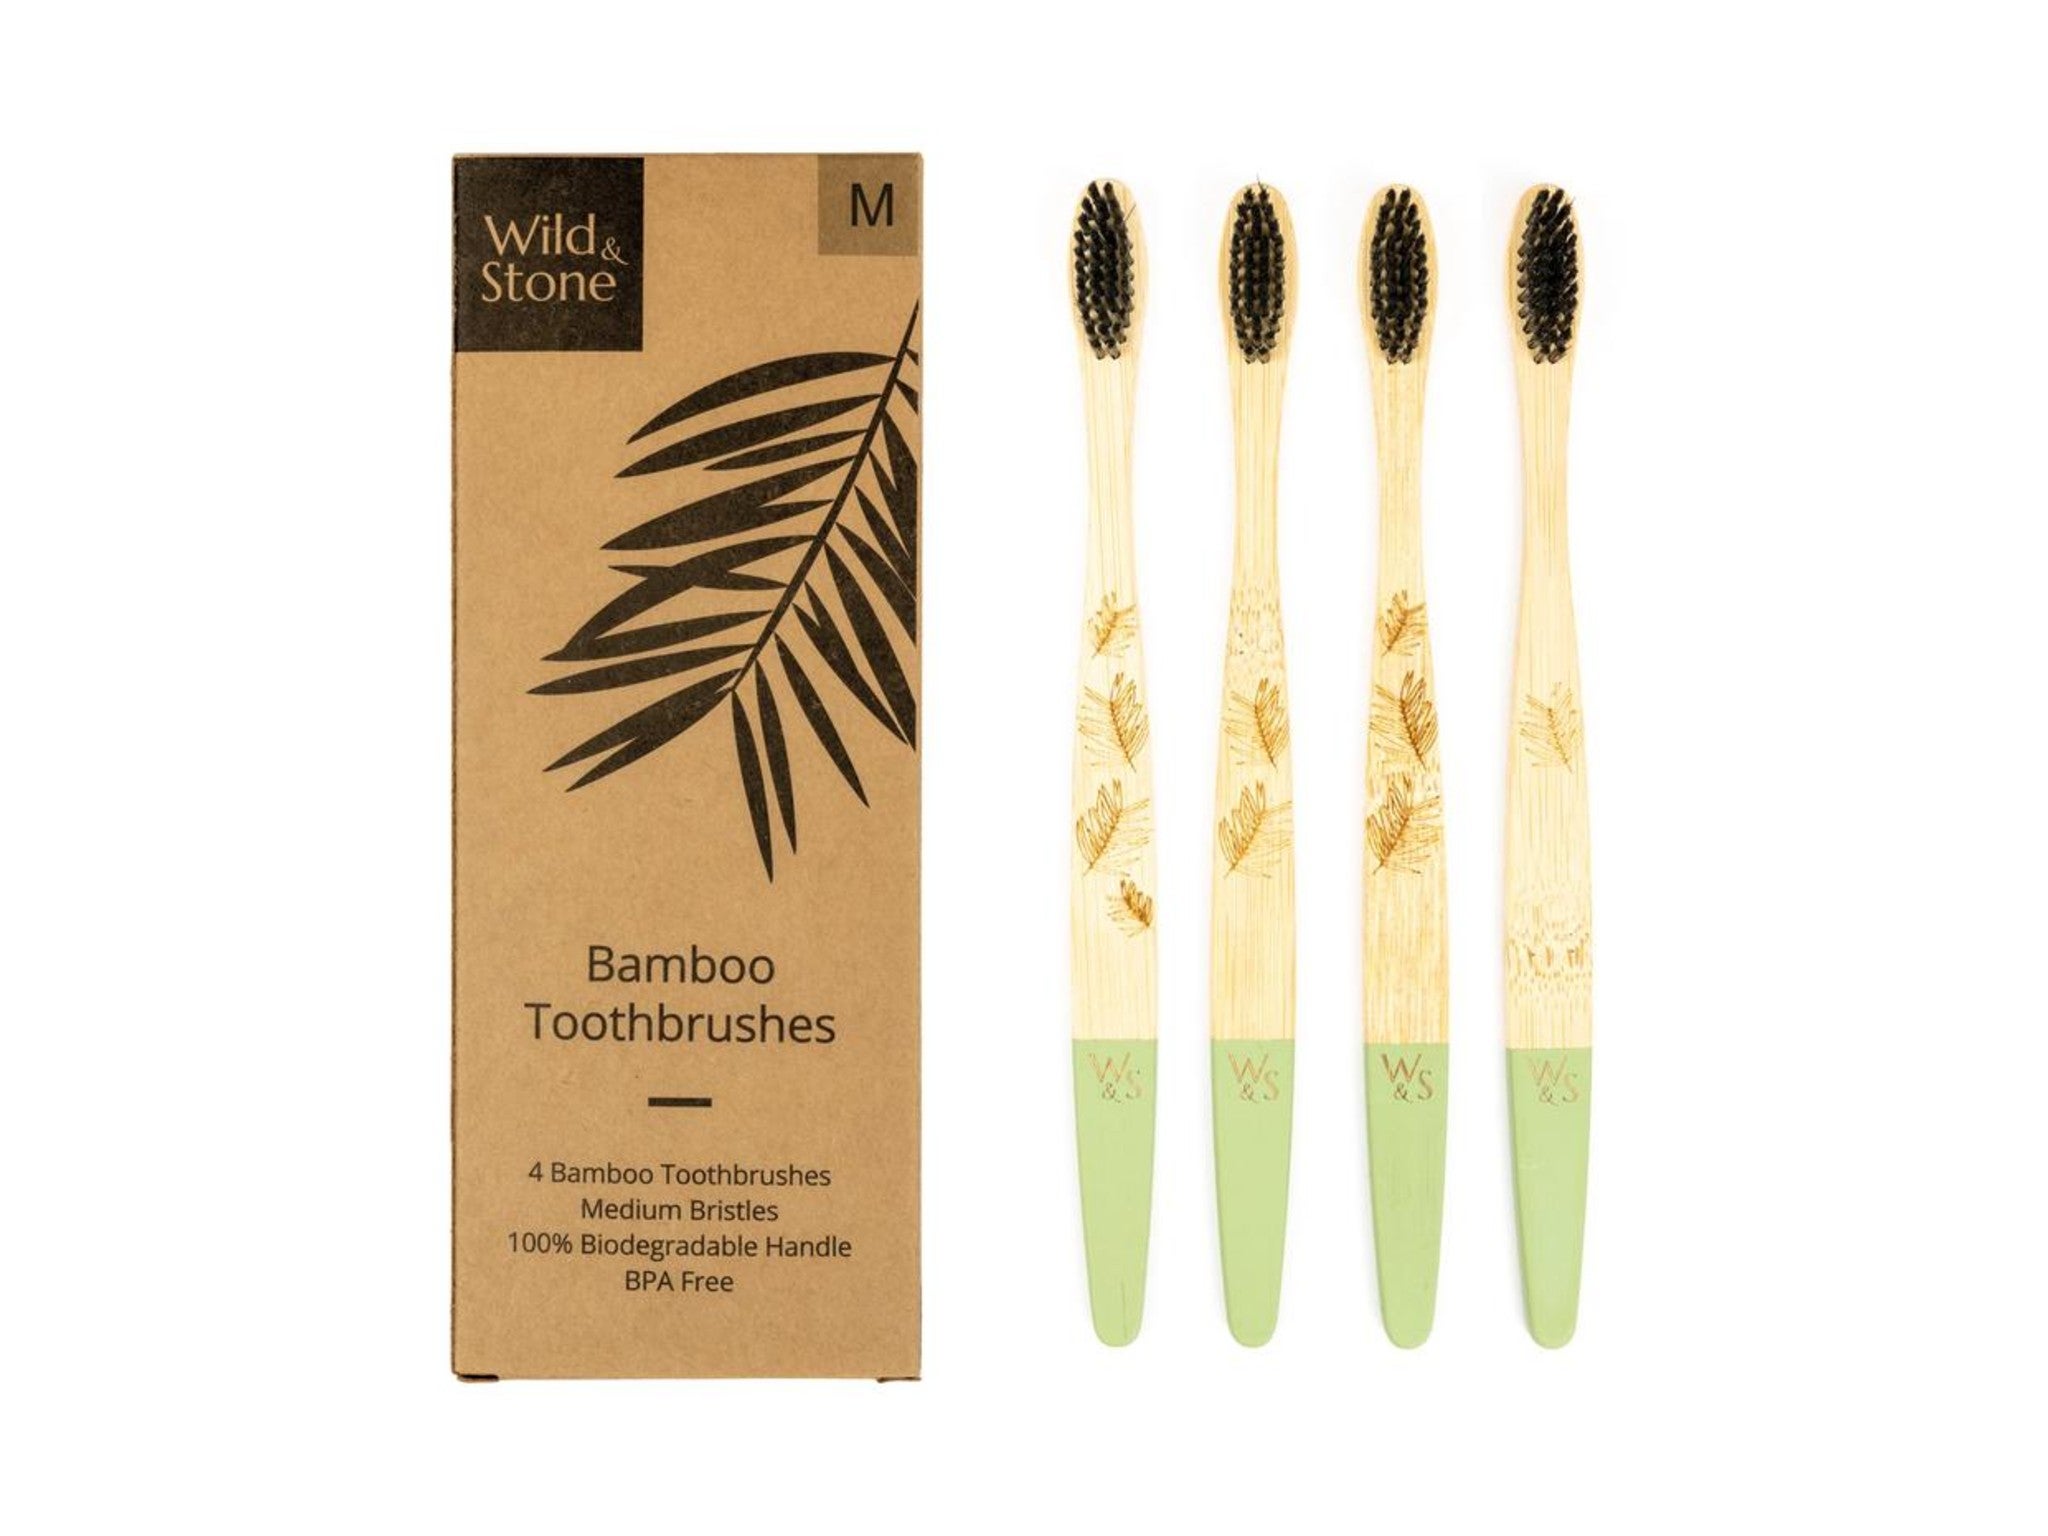 Wild and Stone bamboo toothbrush  indybest.jpeg